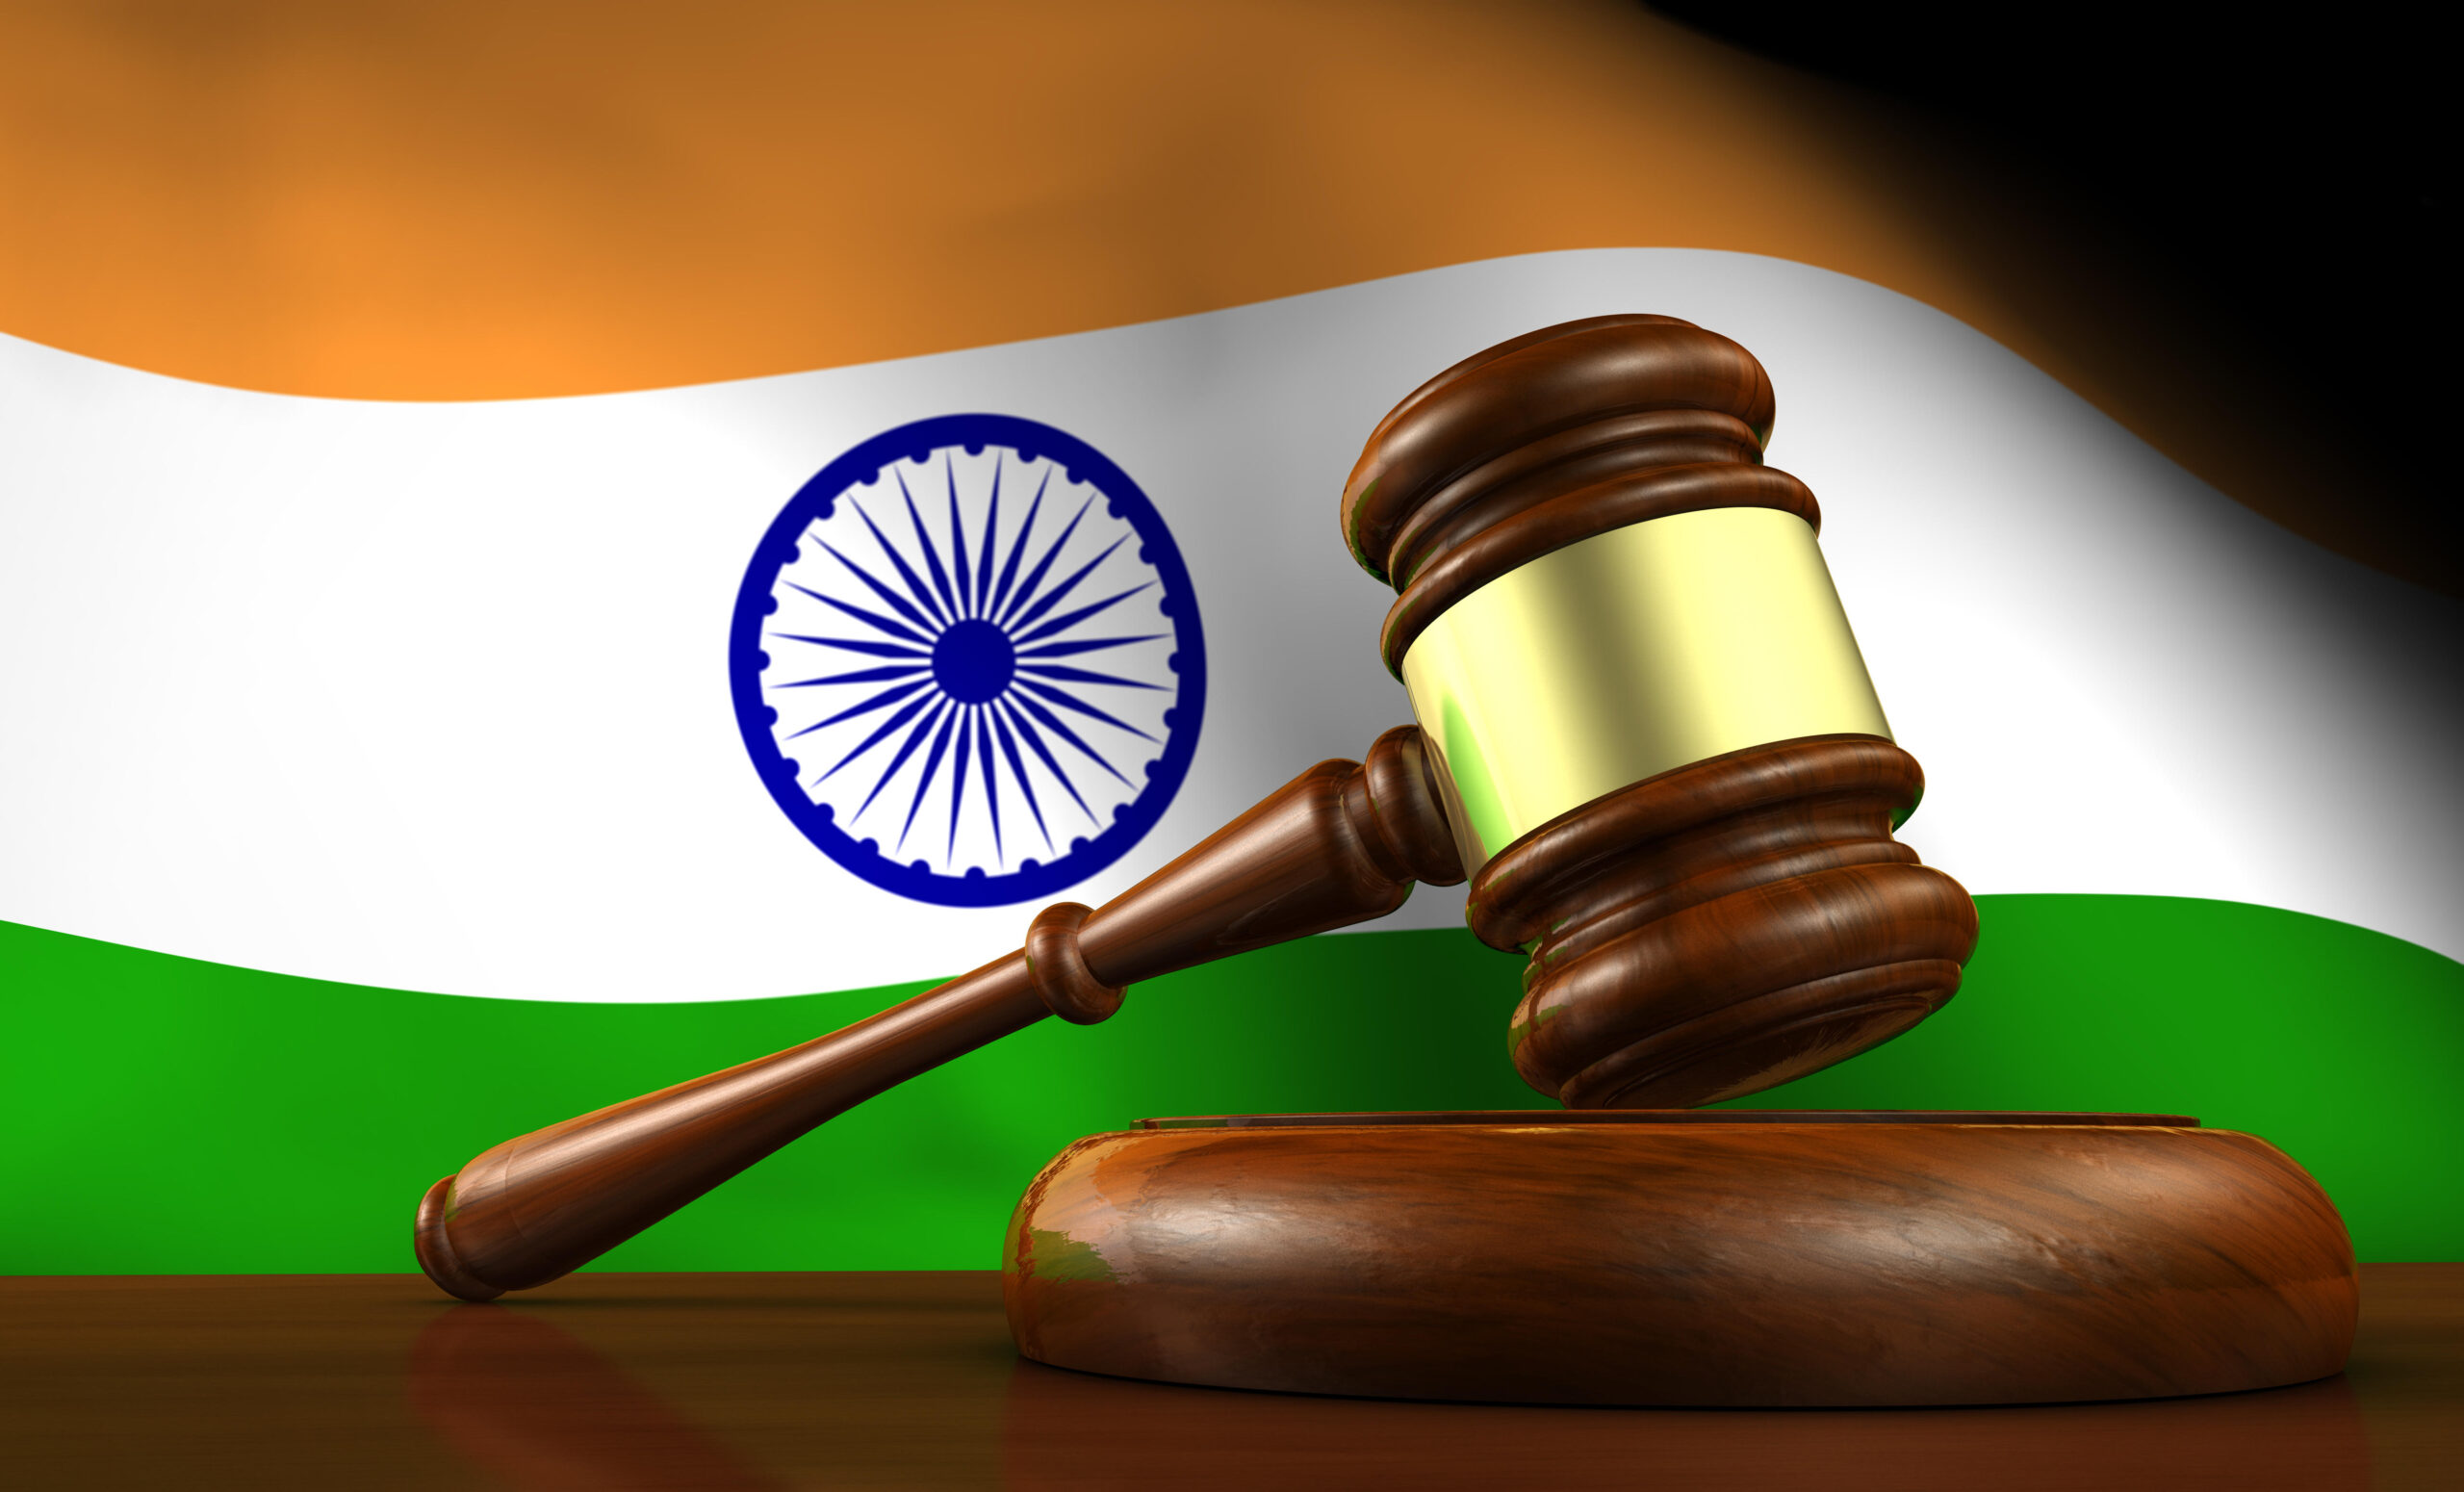 India Data Protection Bill Approved, Despite Privacy Concerns – Source: www.darkreading.com